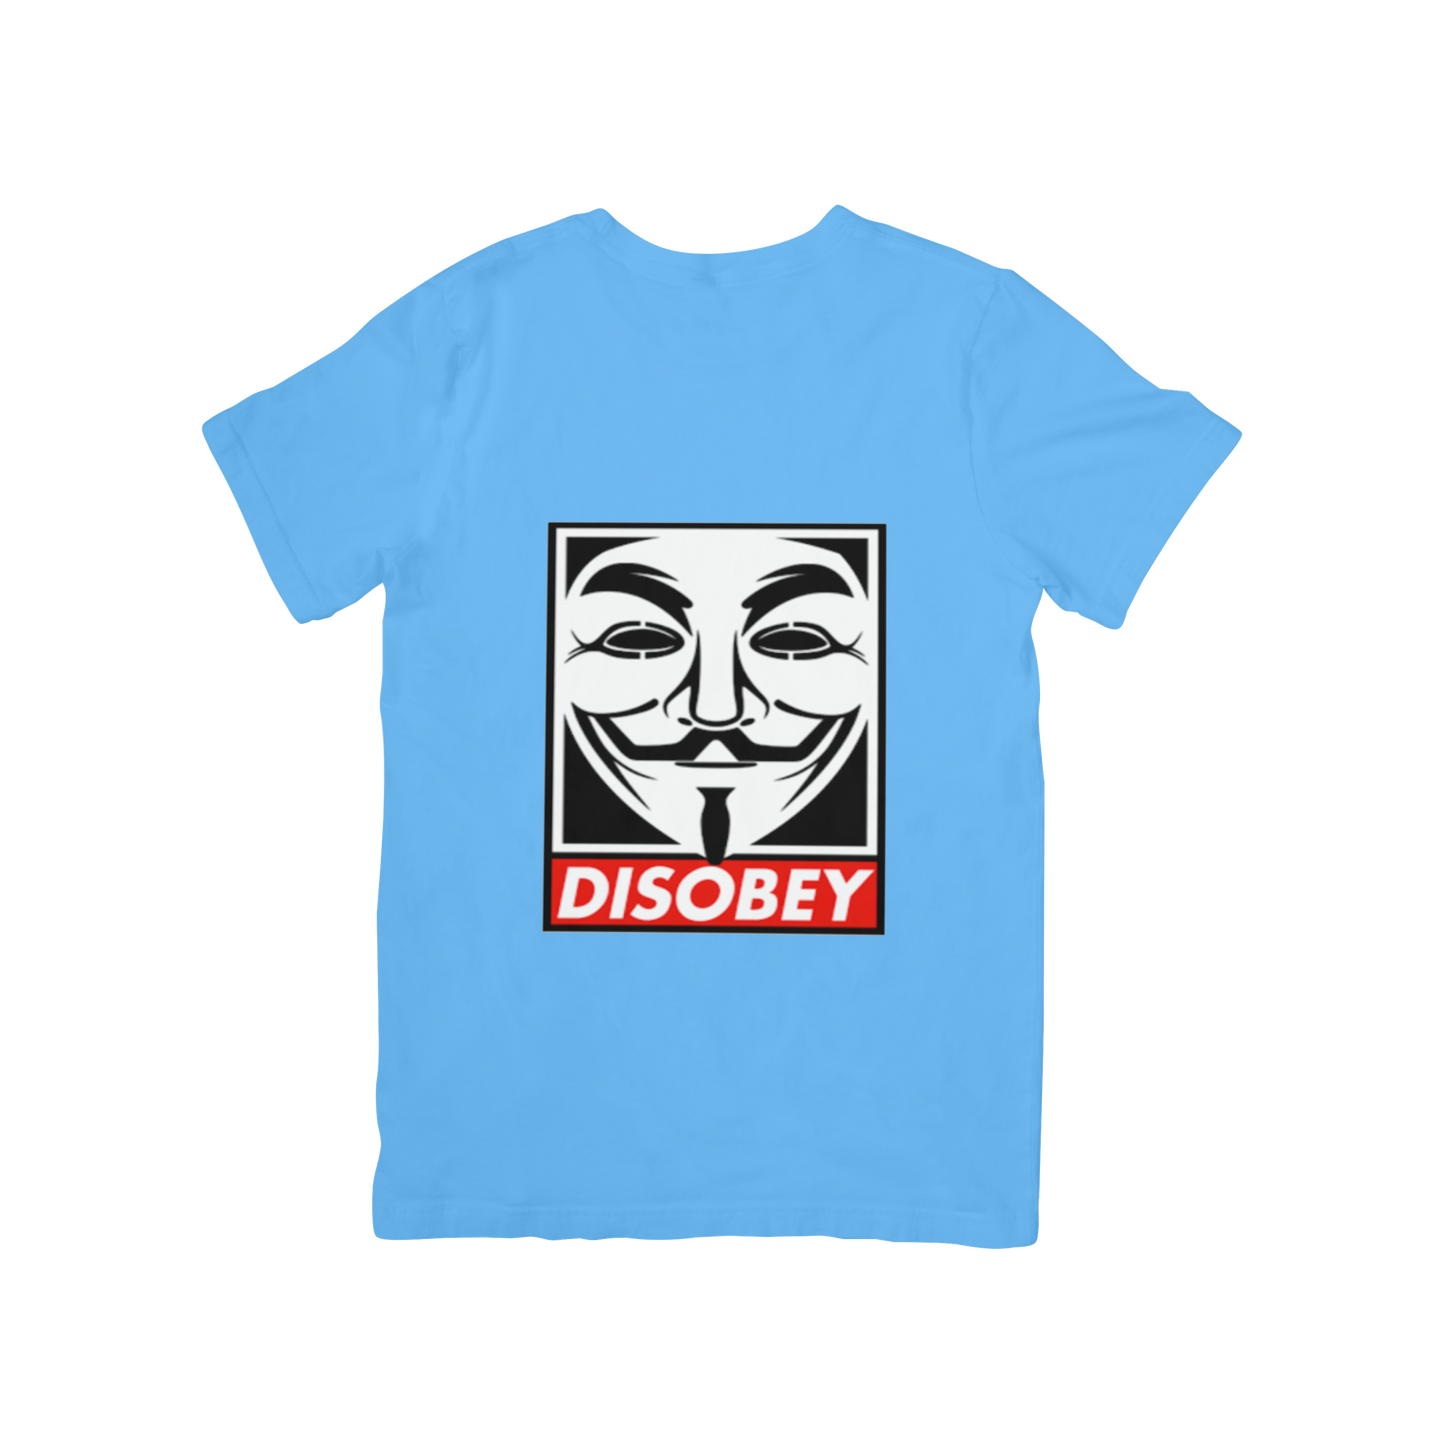 Disobey Design T-shirt